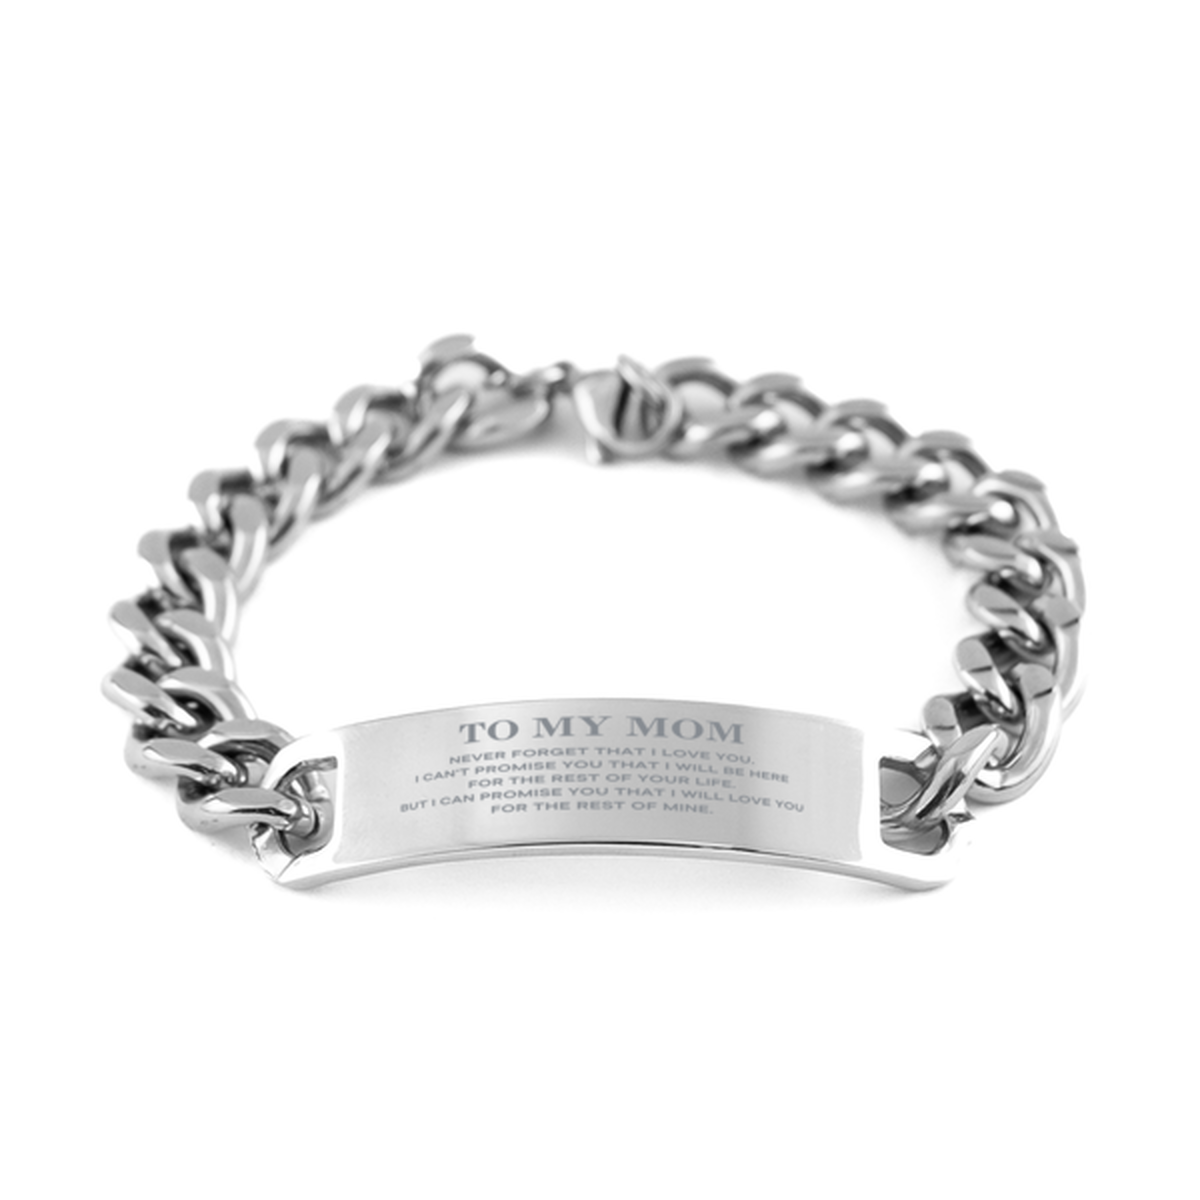 To My Mom Gifts, I will love you for the rest of mine, Love Mom Bracelet, Birthday Christmas Unique Cuban Chain Stainless Steel Bracelet For Mom